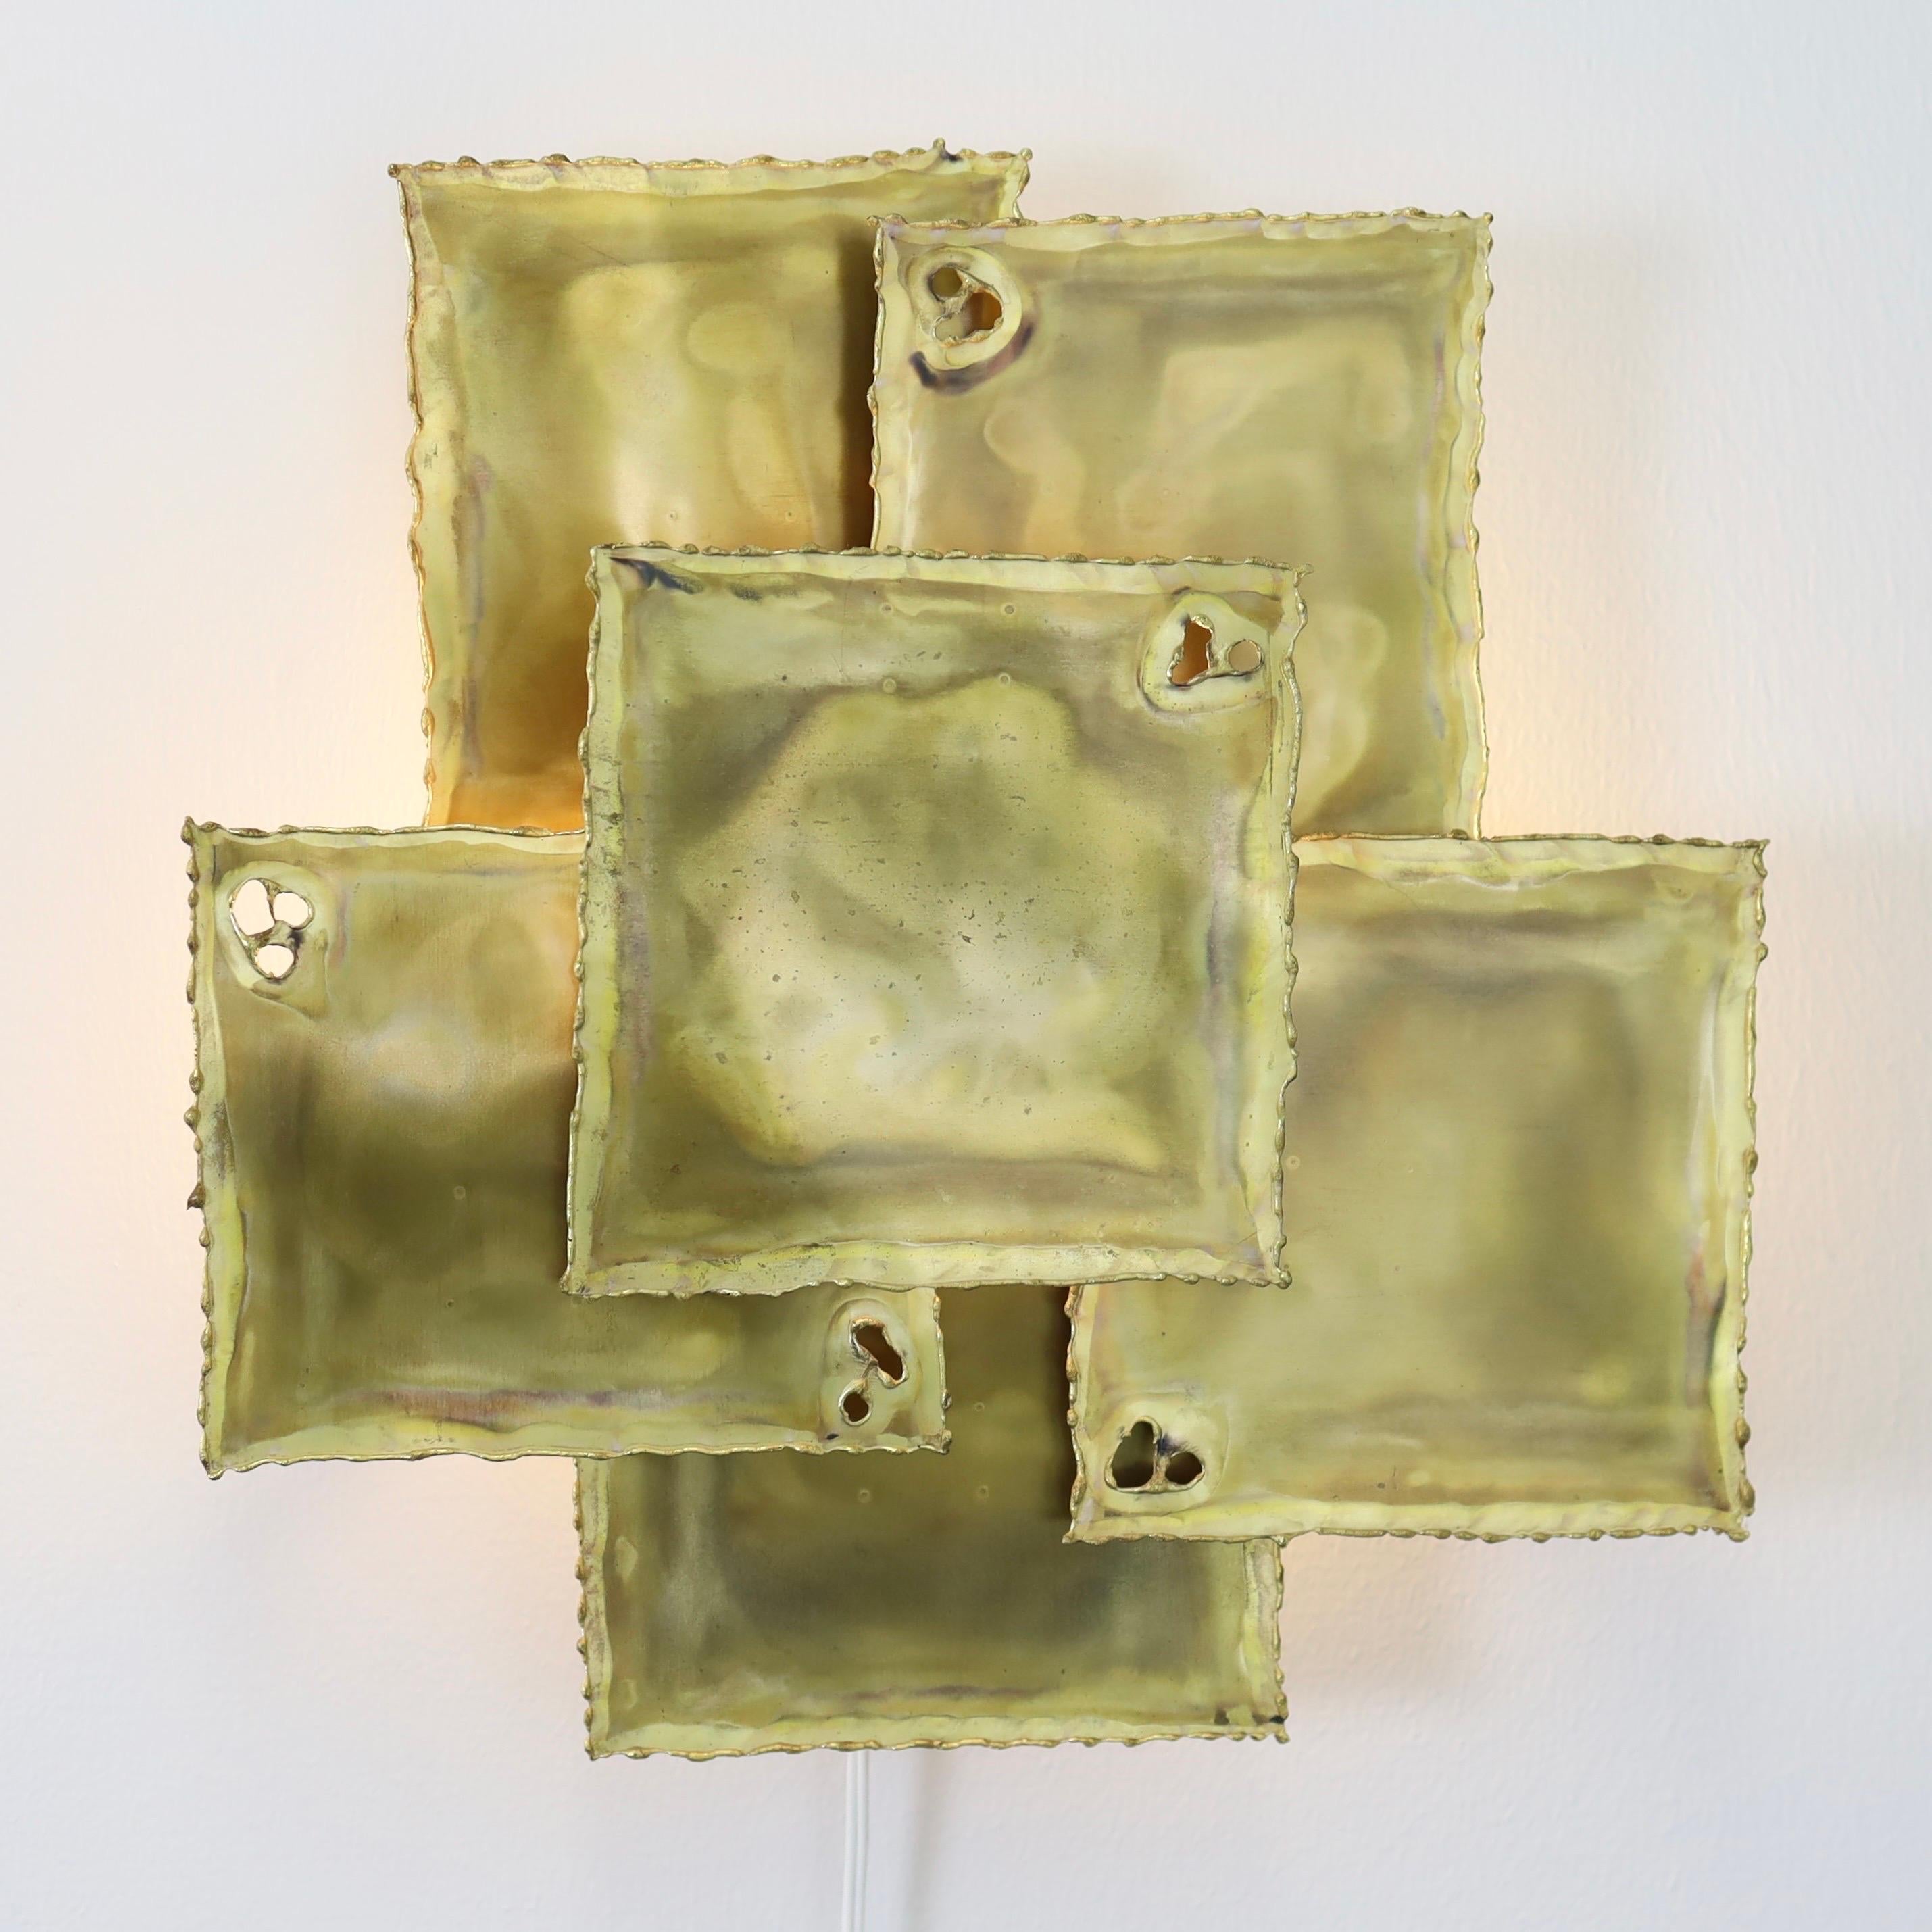 Pair of Large Brass Wall Lamps by Svend Aage Holm Sorensen, 1960s, Denmark For Sale 1